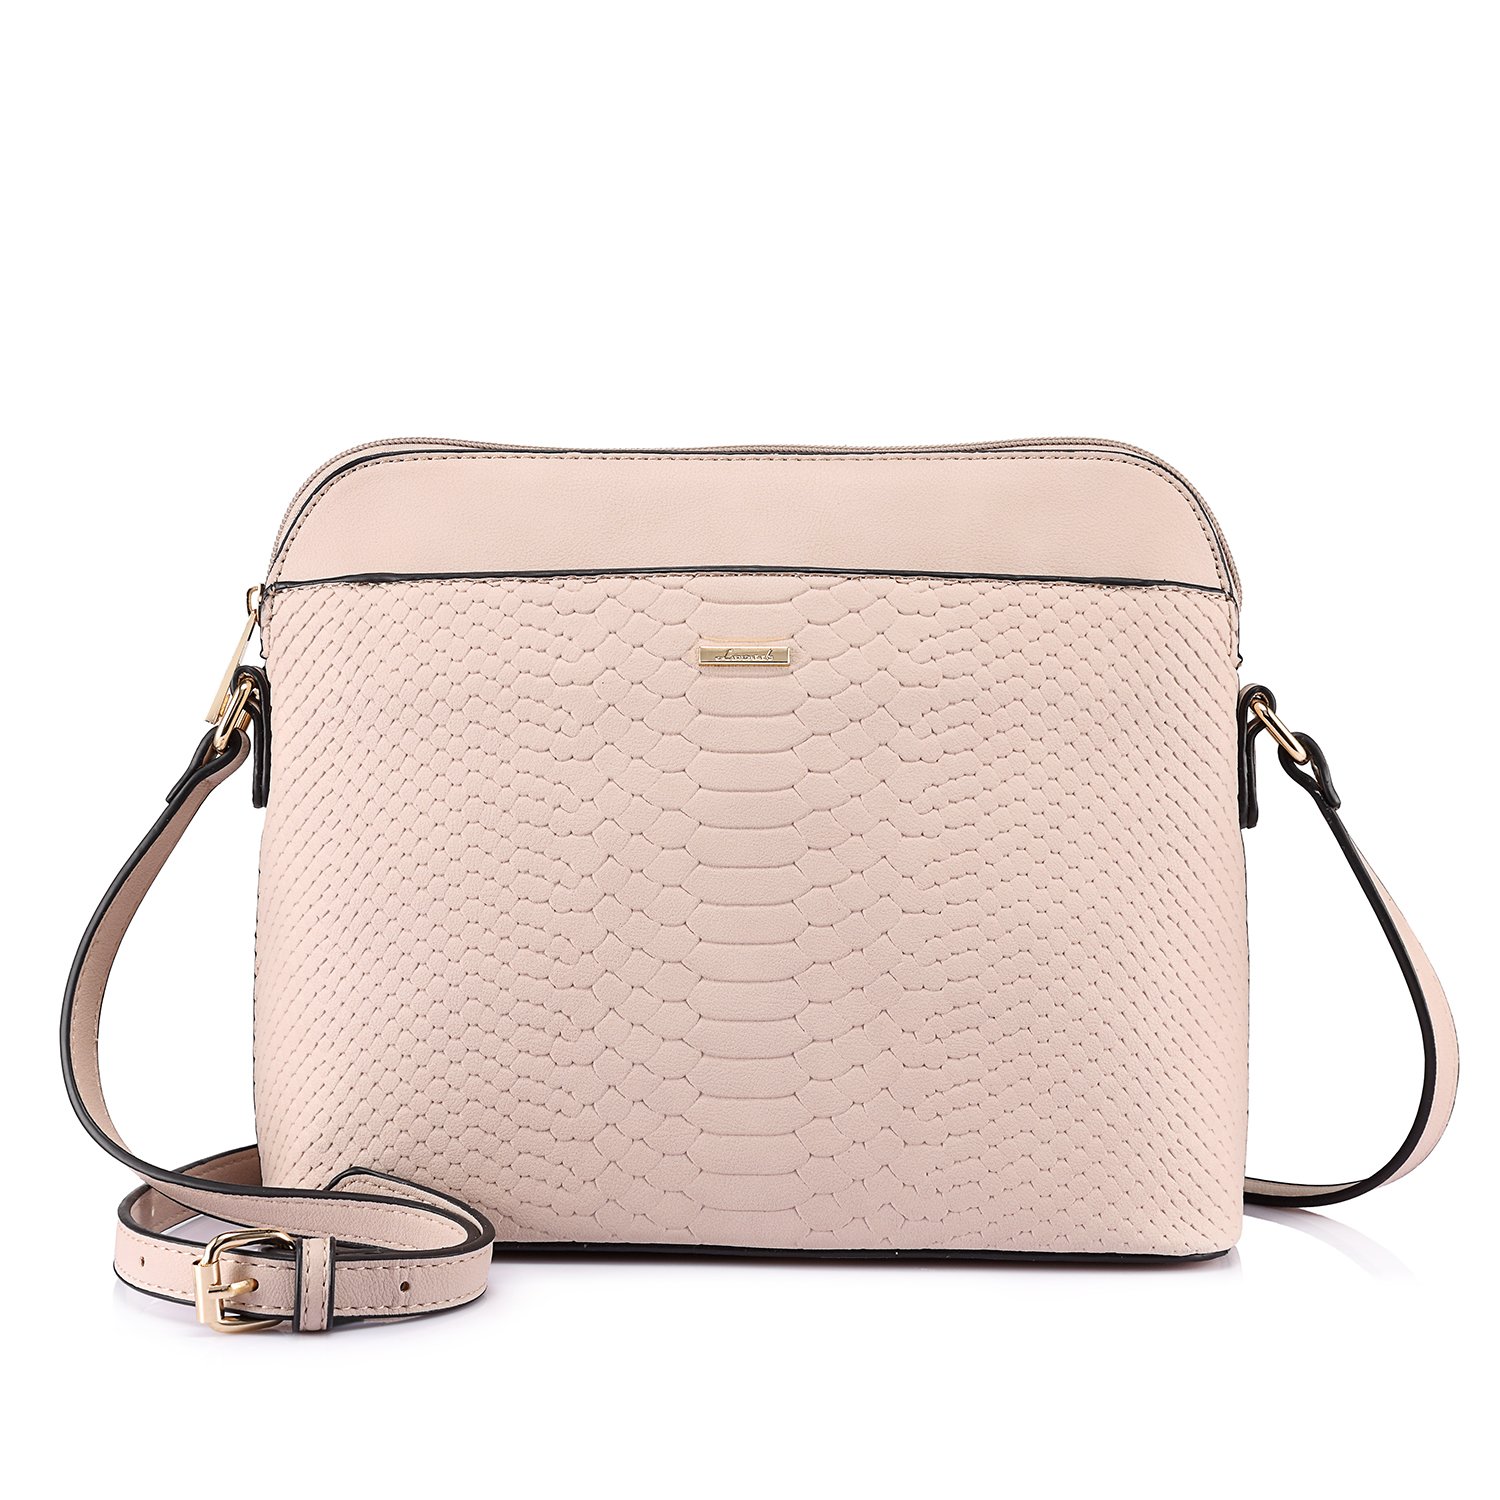 Review of Stylish Crossbody Bags Purses Shoulder Bag for Women in Contrast Design